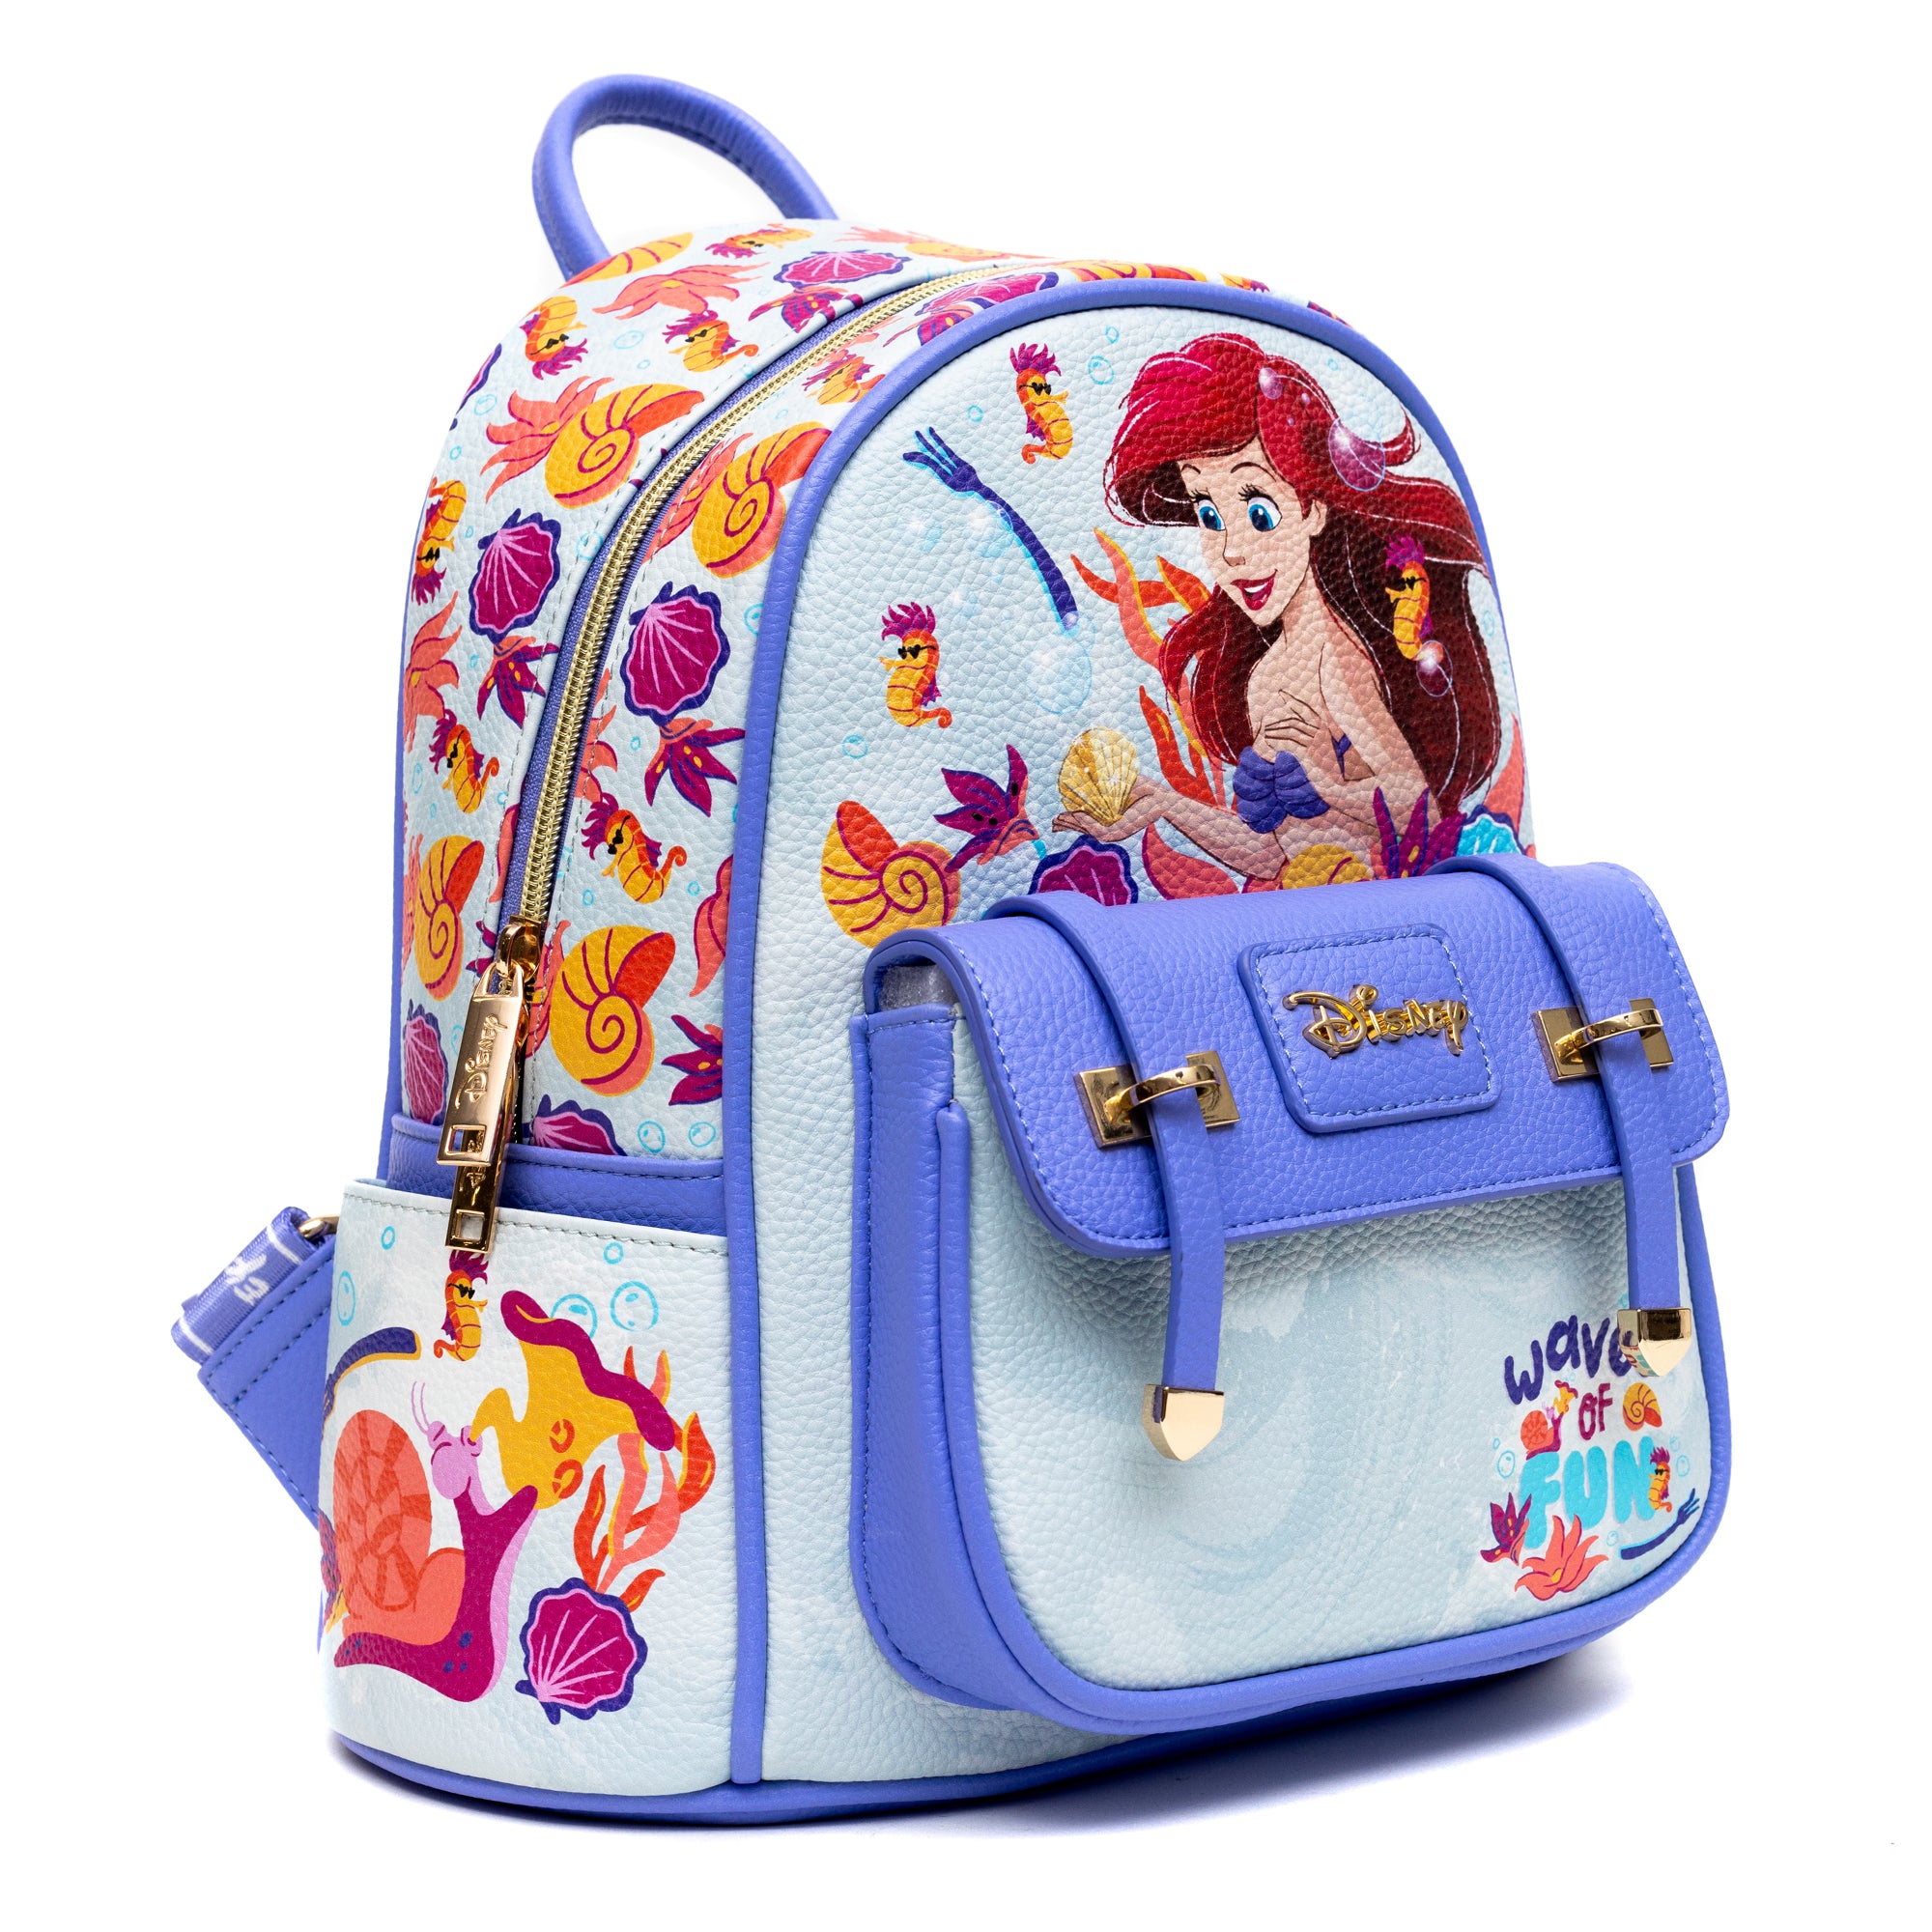 WondaPOP LUXE - Disney The Little Mermaid Mini Backpack - Limited Edition - NEW RELEASE